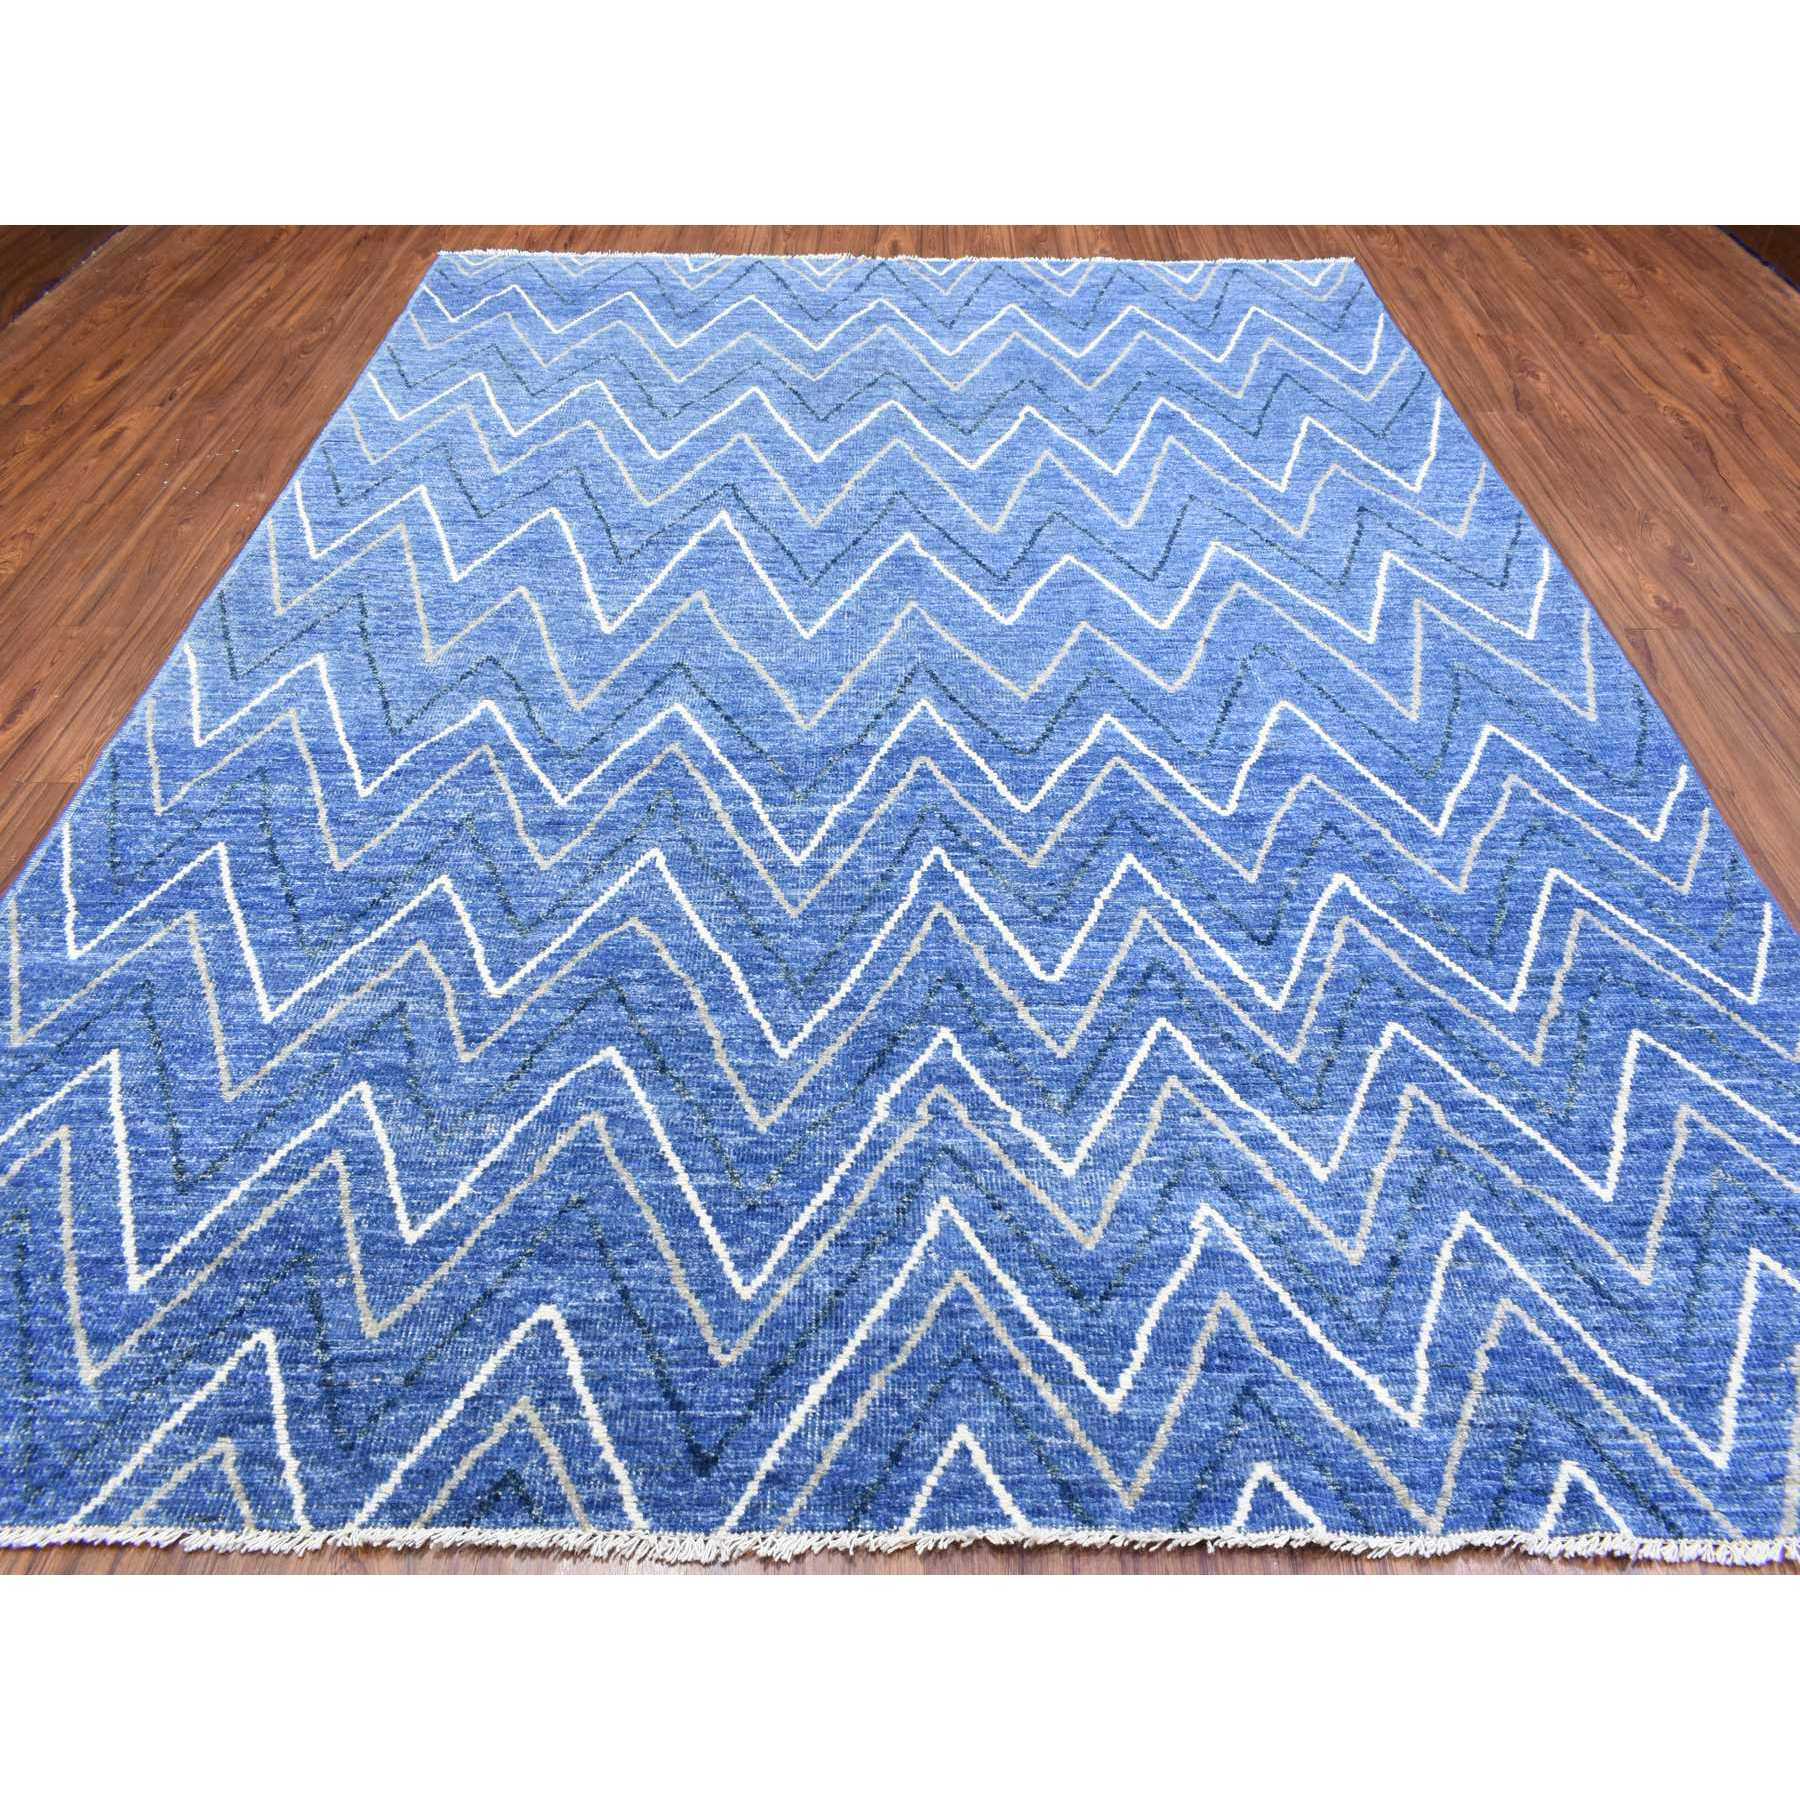 9'x11'5" Denim Blue, Boujaad Moroccan Berber Design with Zig Zag Chevron Design Natural Dyes, Pure Wool Hand Woven, Oriental Rug 